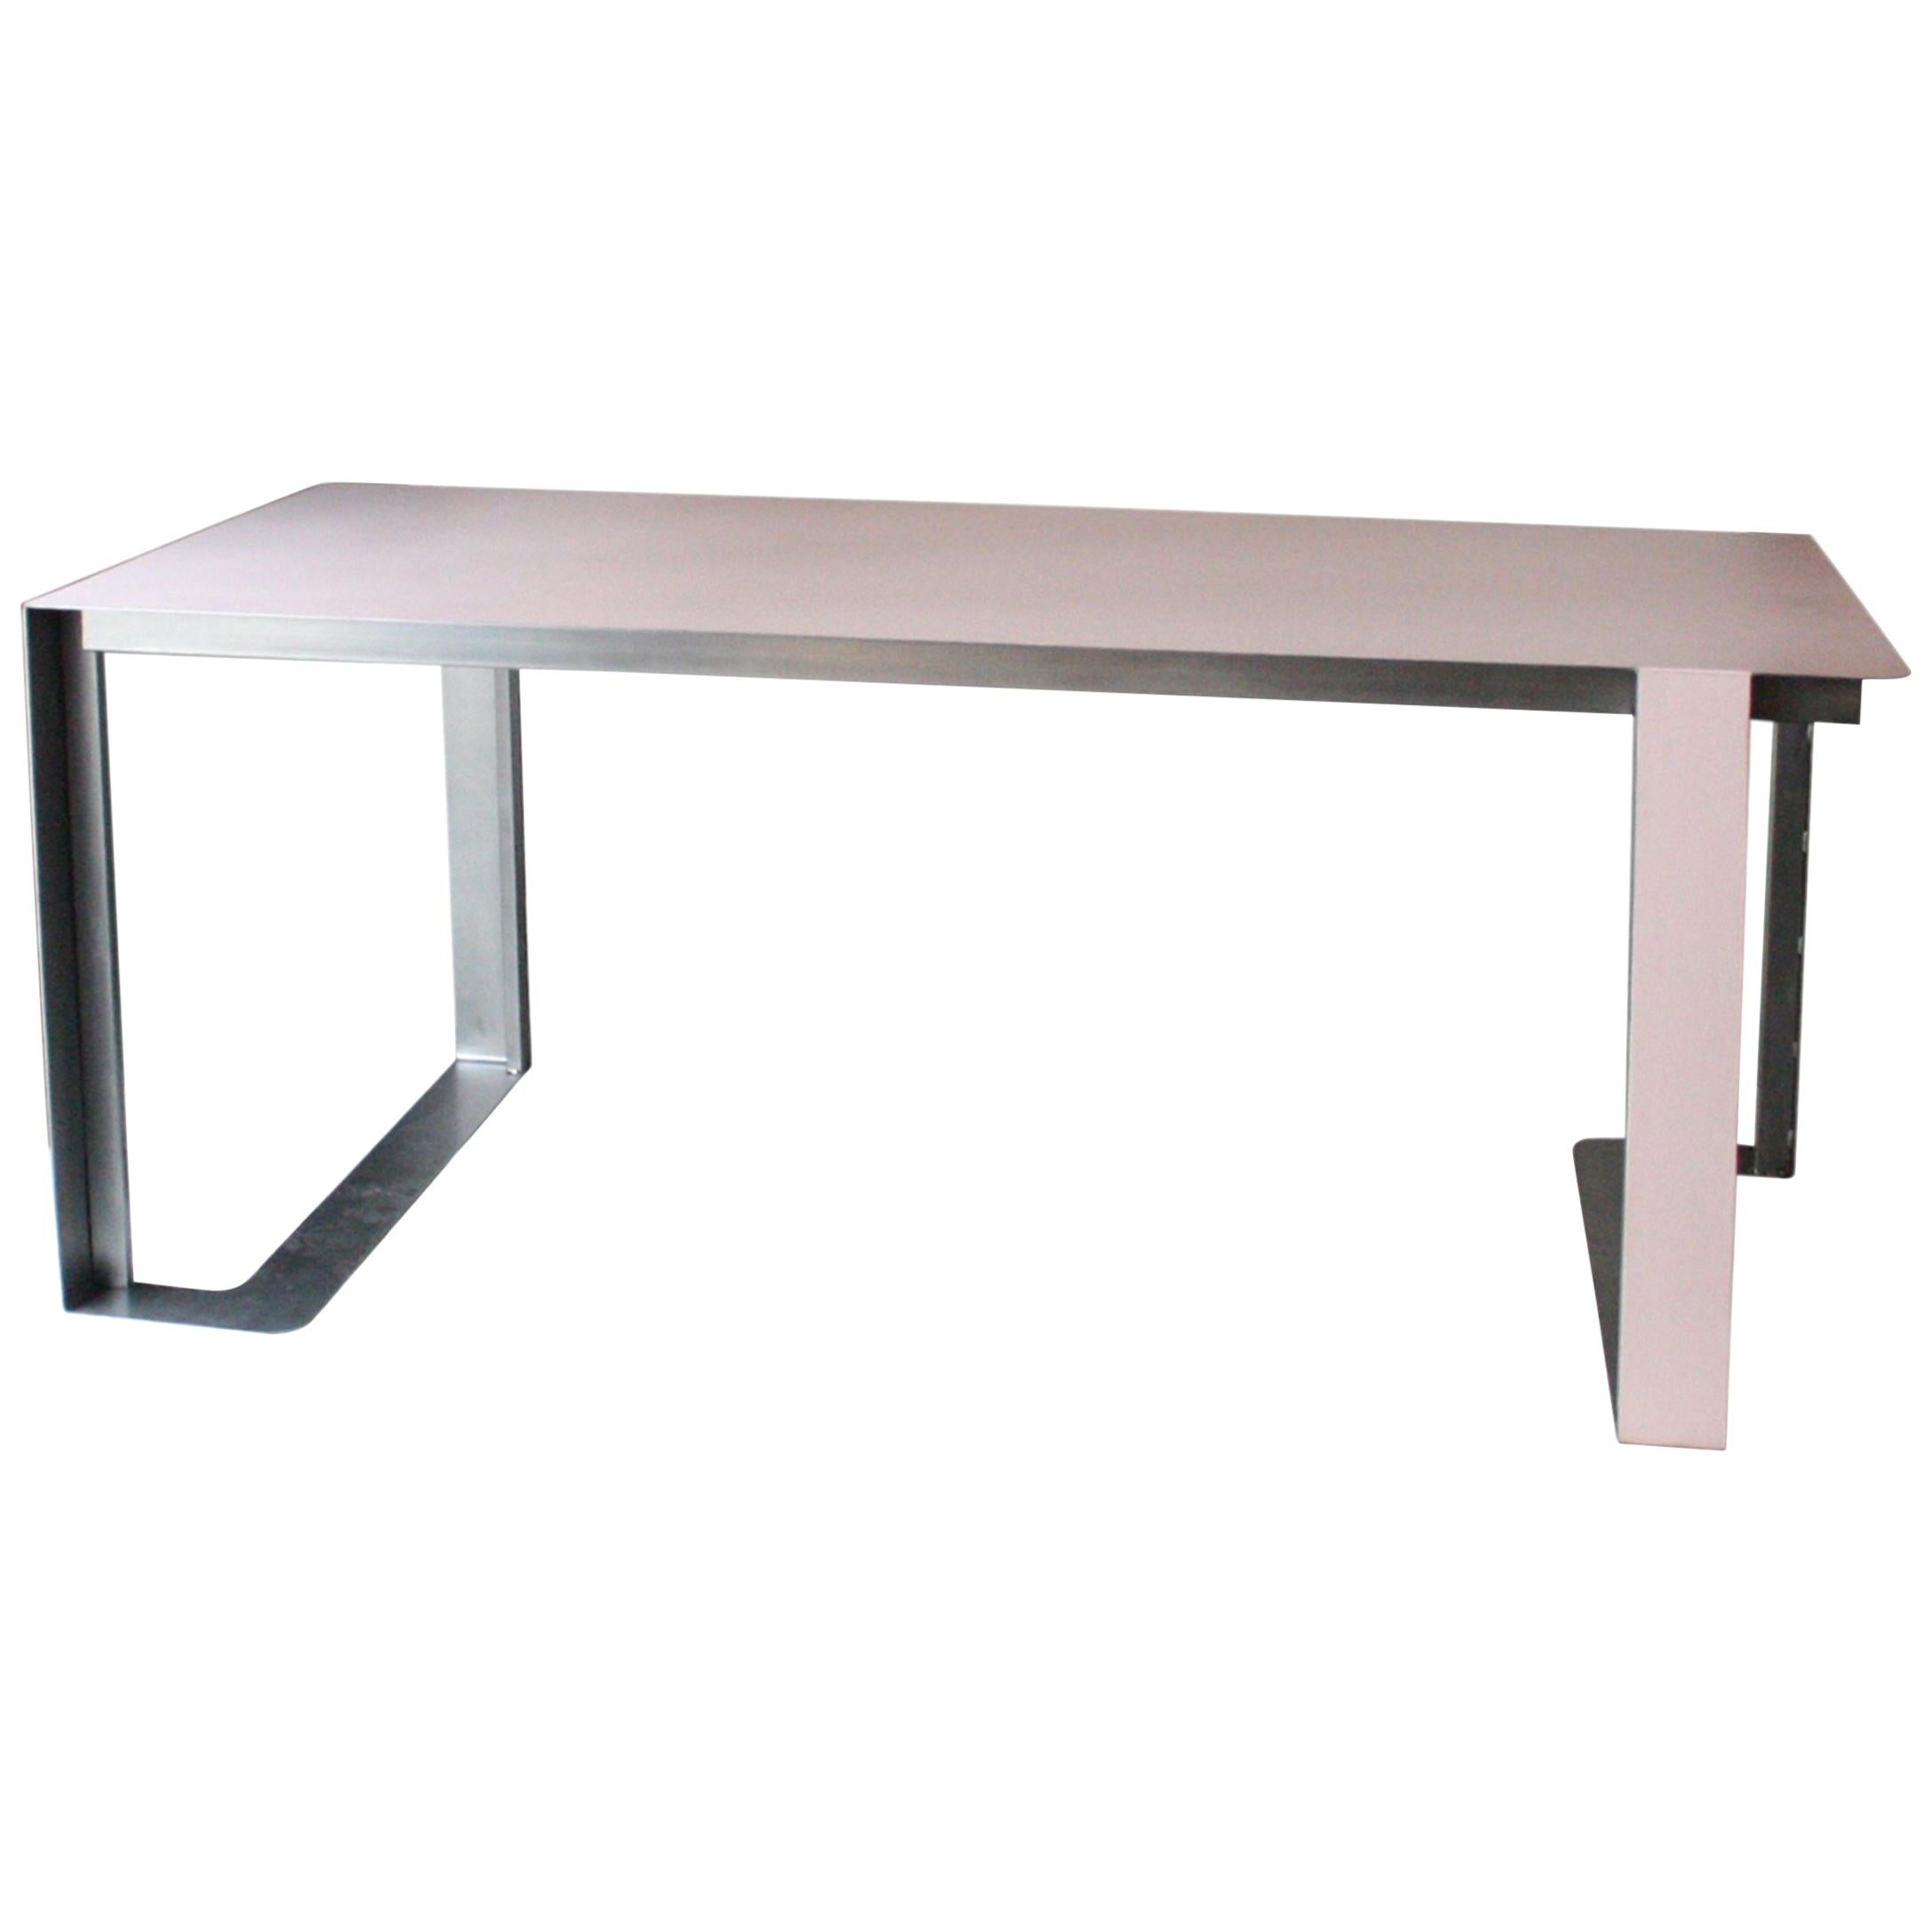 Laurent Dif Contemporary Rectangular Pink Steel French Dining Table, 2016